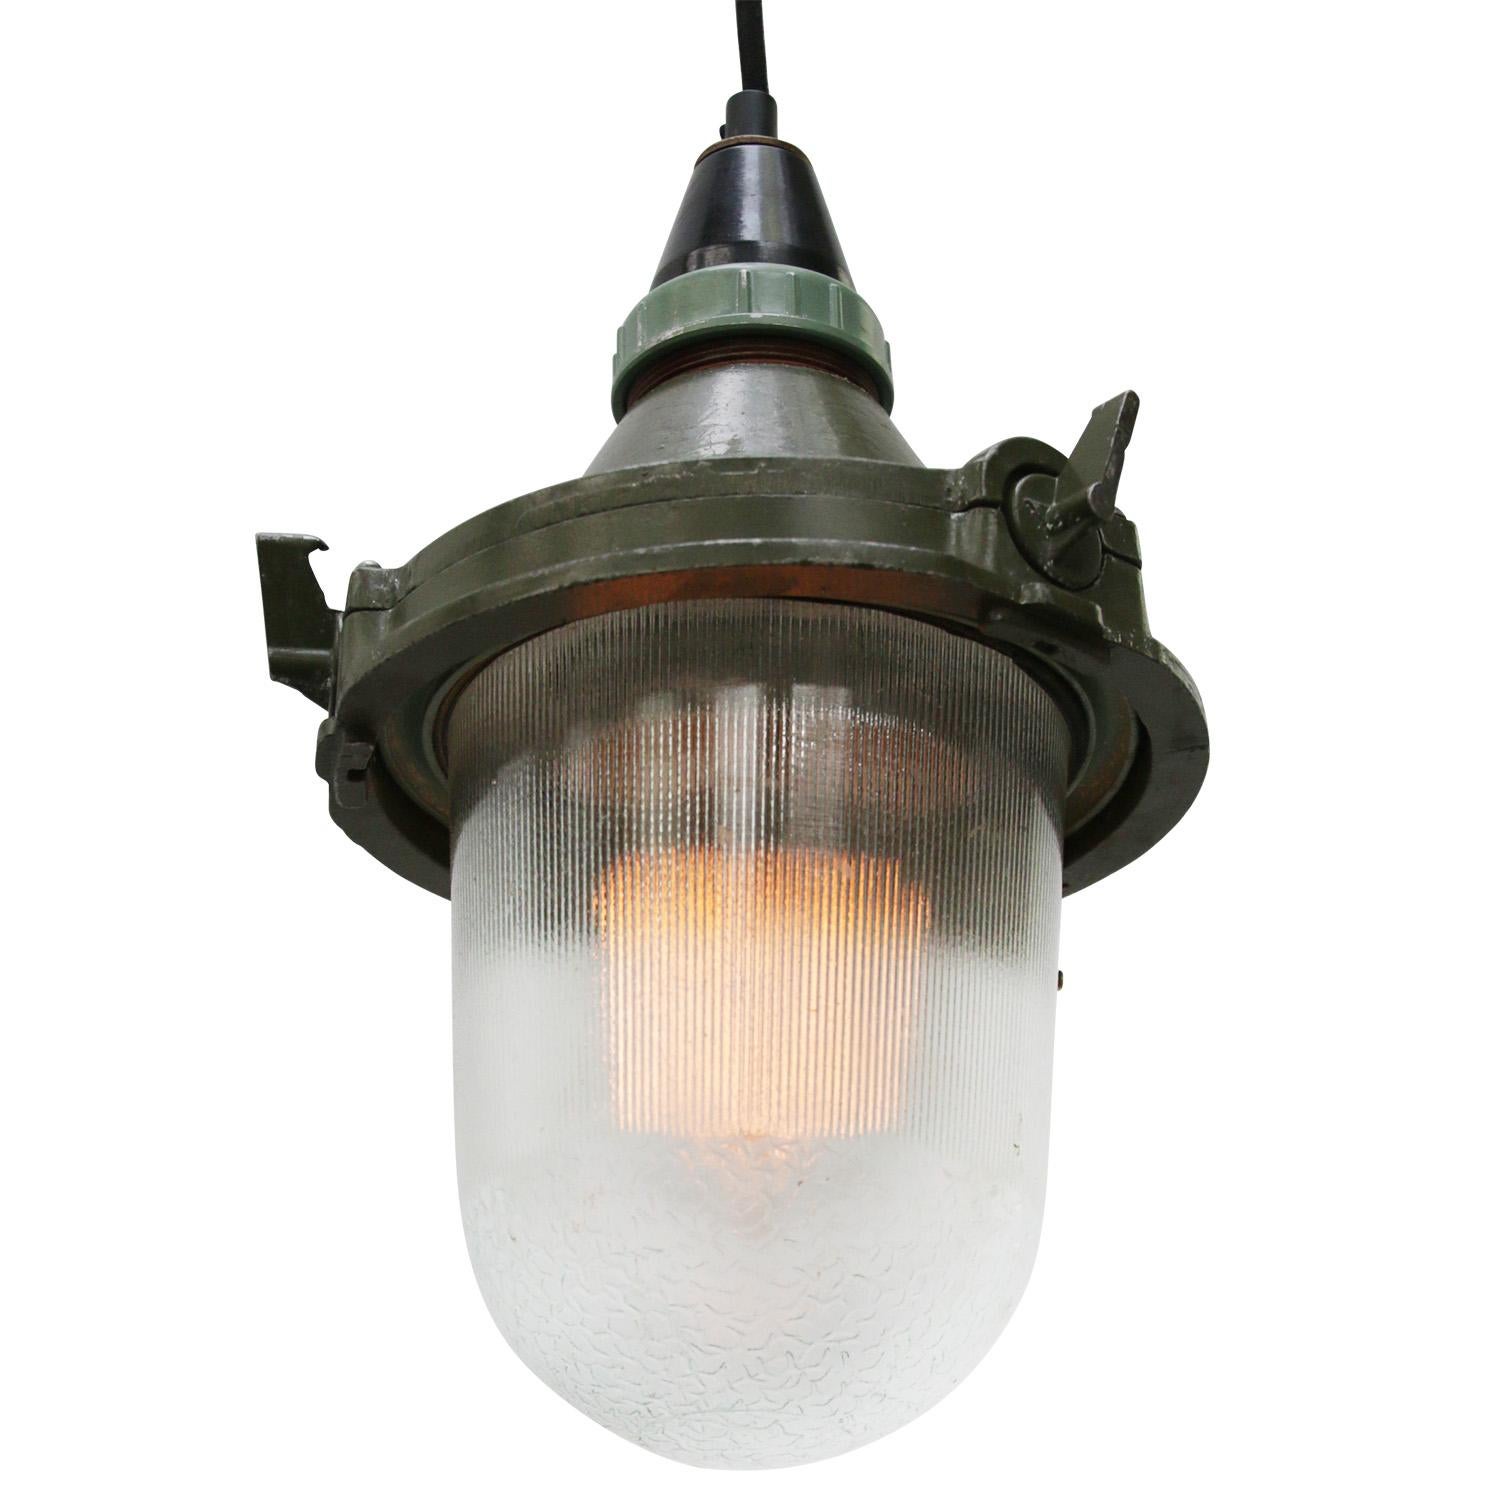 Green industrial pendant.
Aluminum with bakelite top.
Clear striped glass. 

Weight: 1.00 kg / 2.2 lb

Priced per individual item. All lamps have been made suitable by international standards for incandescent light bulbs, energy-efficient and